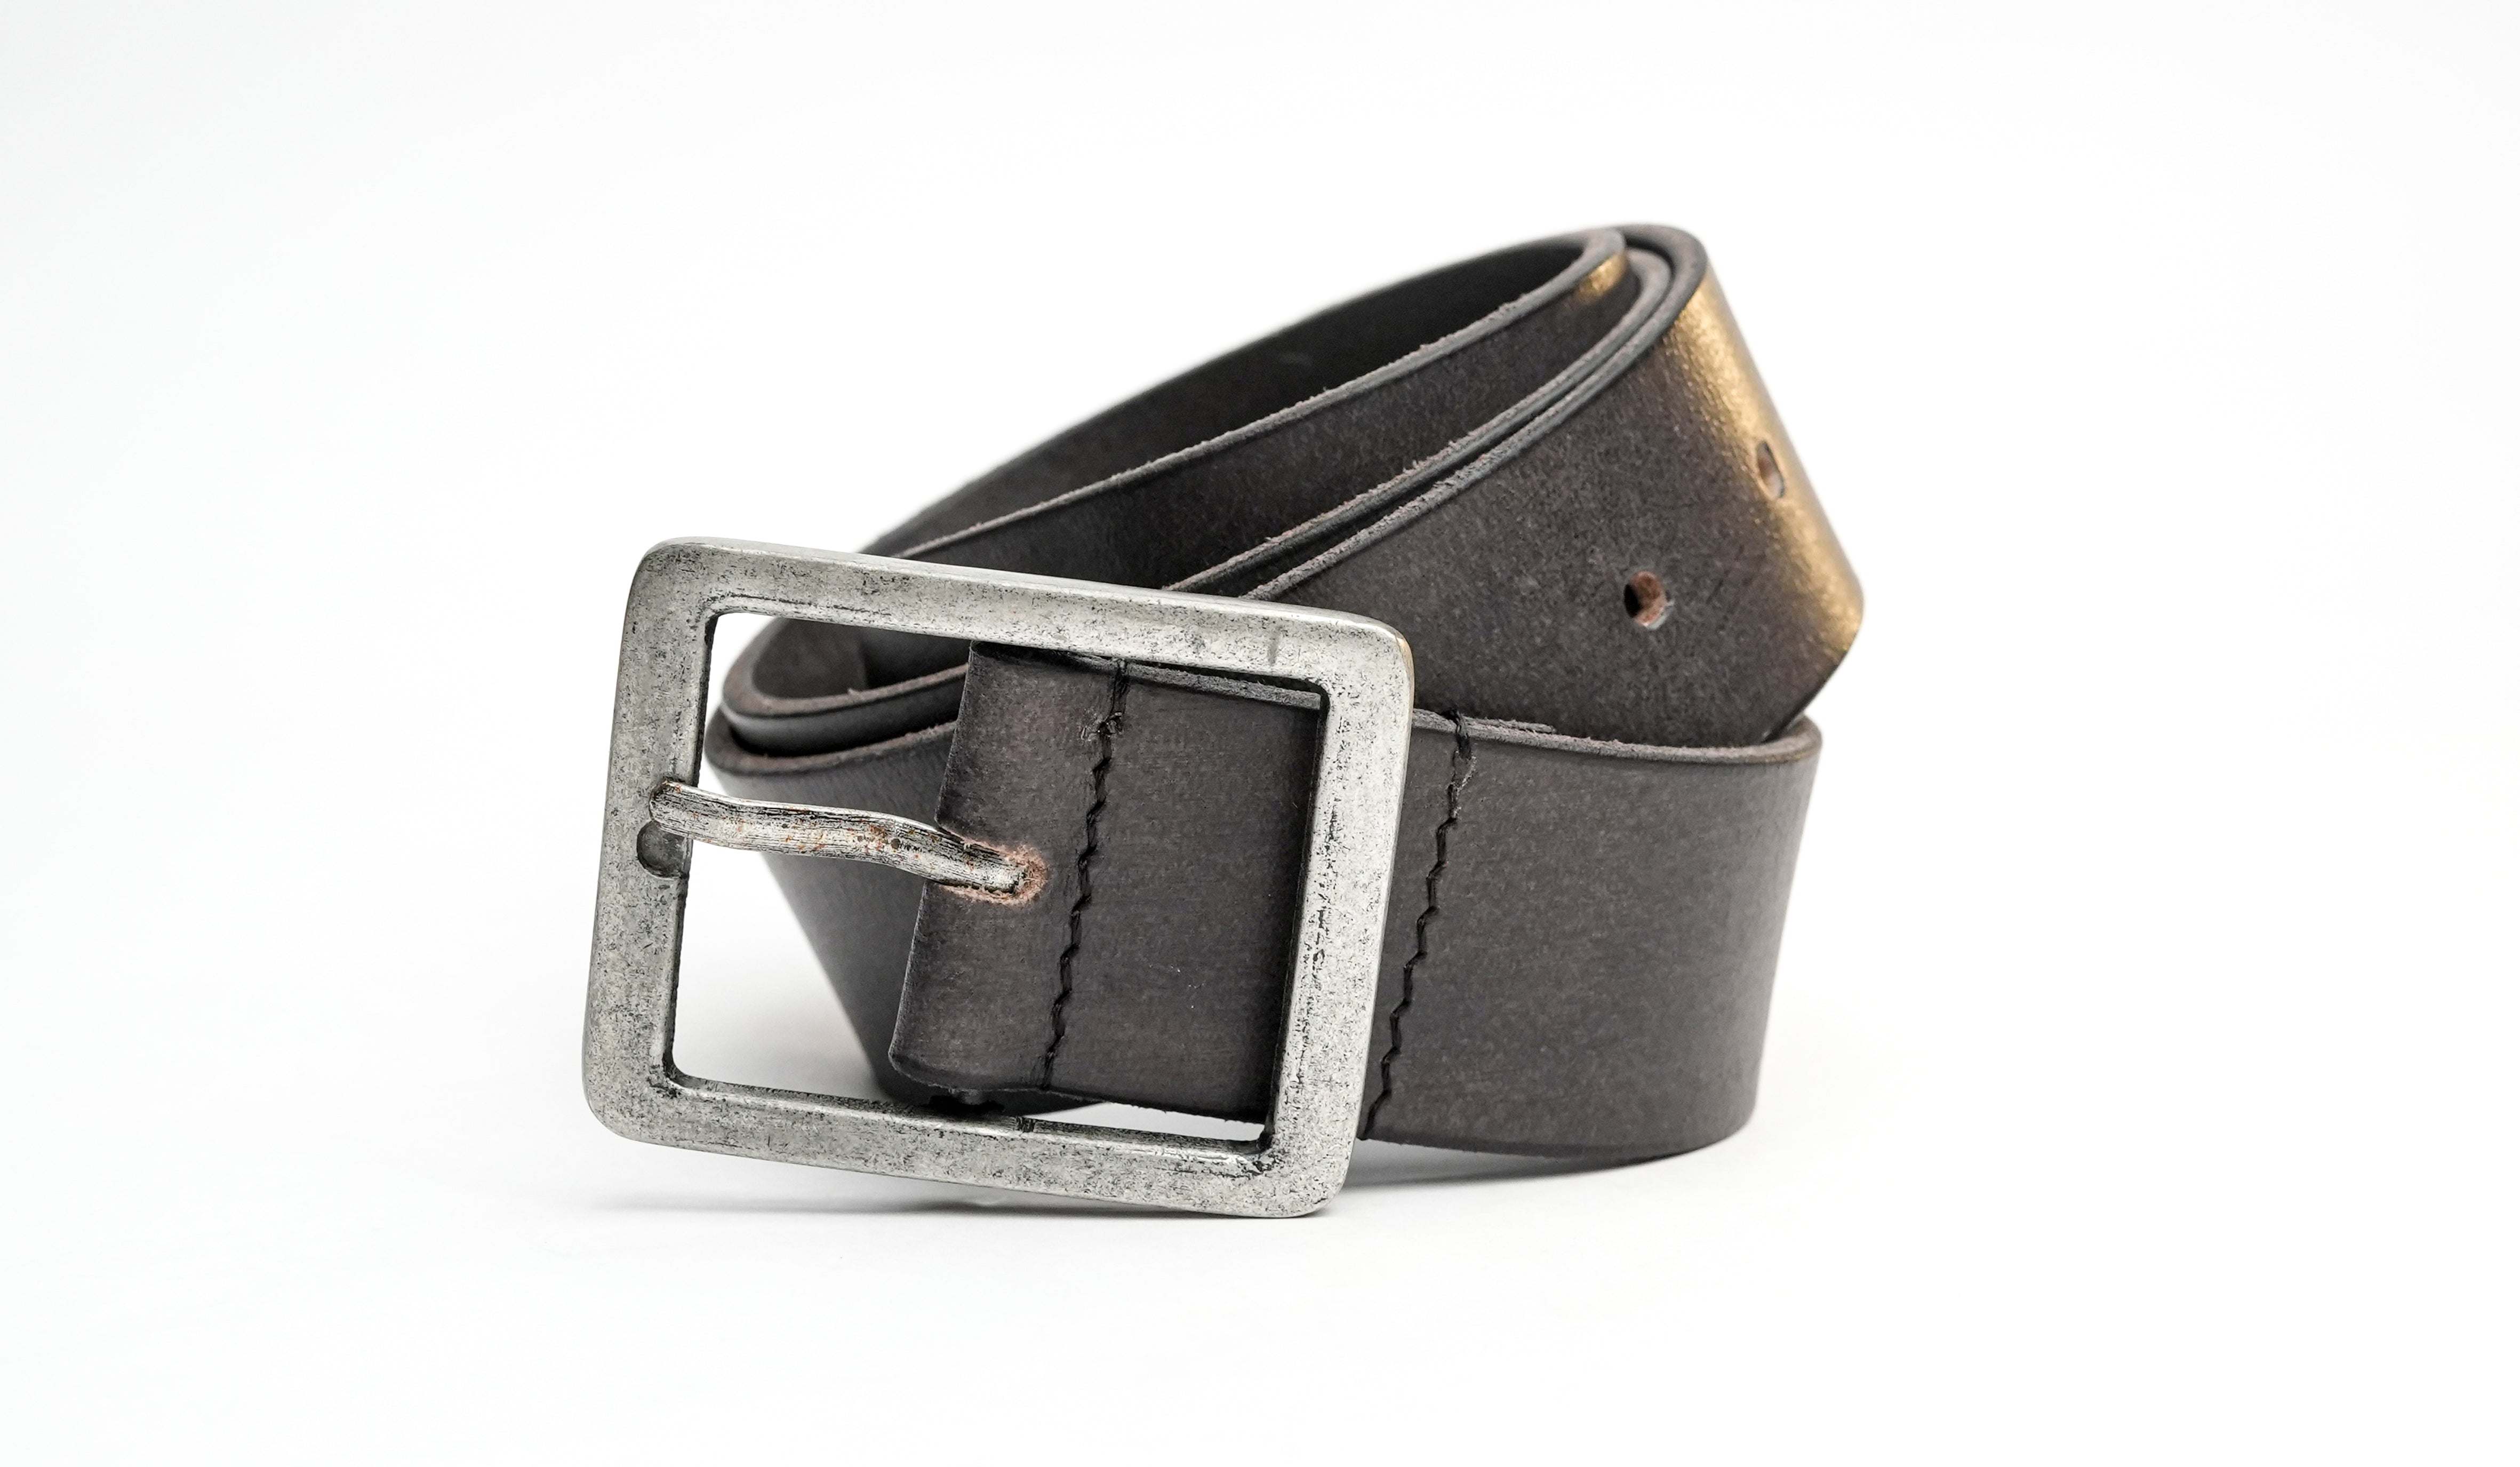 Buy Now The Stylish Top Grain Leather Belt Buckle | Lodis 